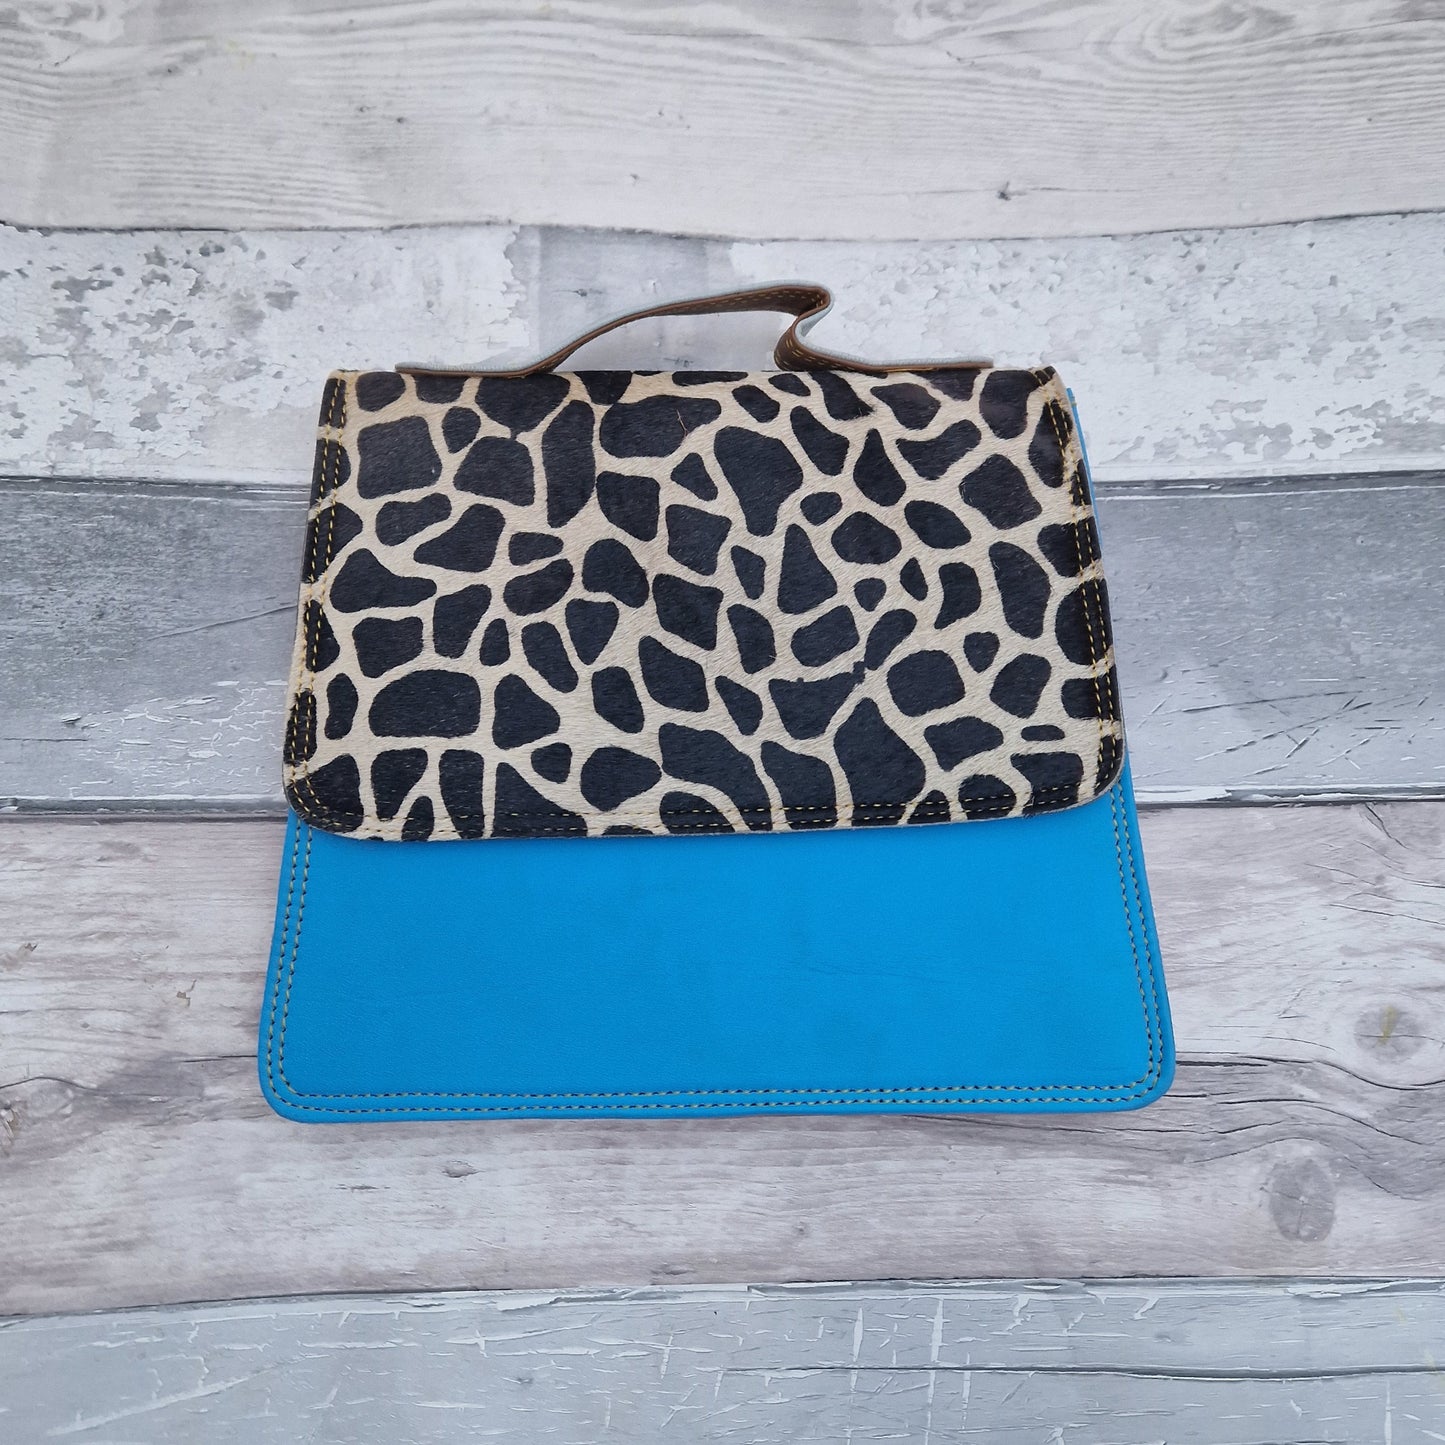 Bright Blue leather bag with a textured front panel in a giraffe print.